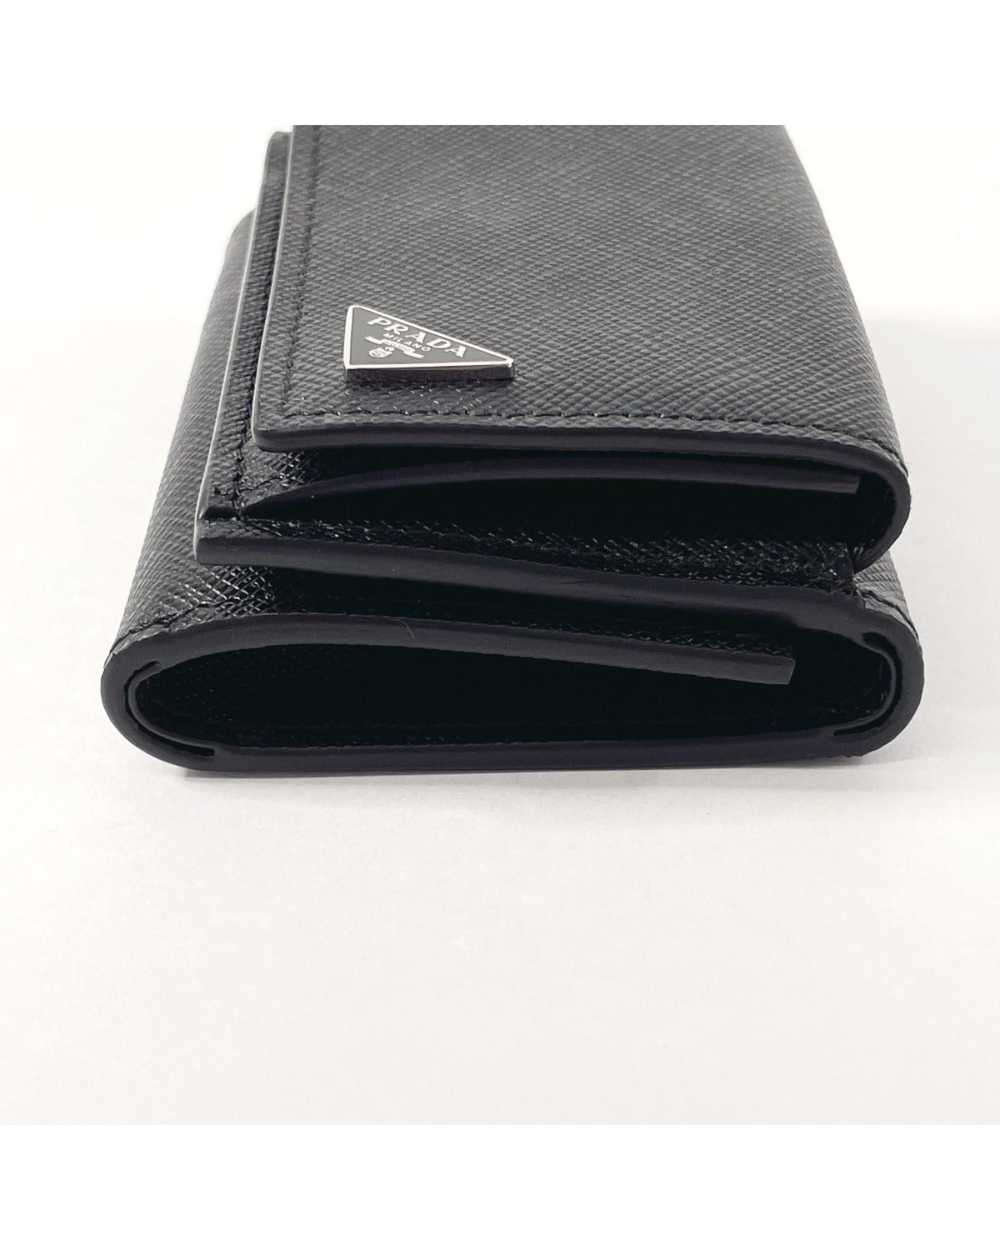 Prada Black Leather Trifold Wallet with Textured … - image 4